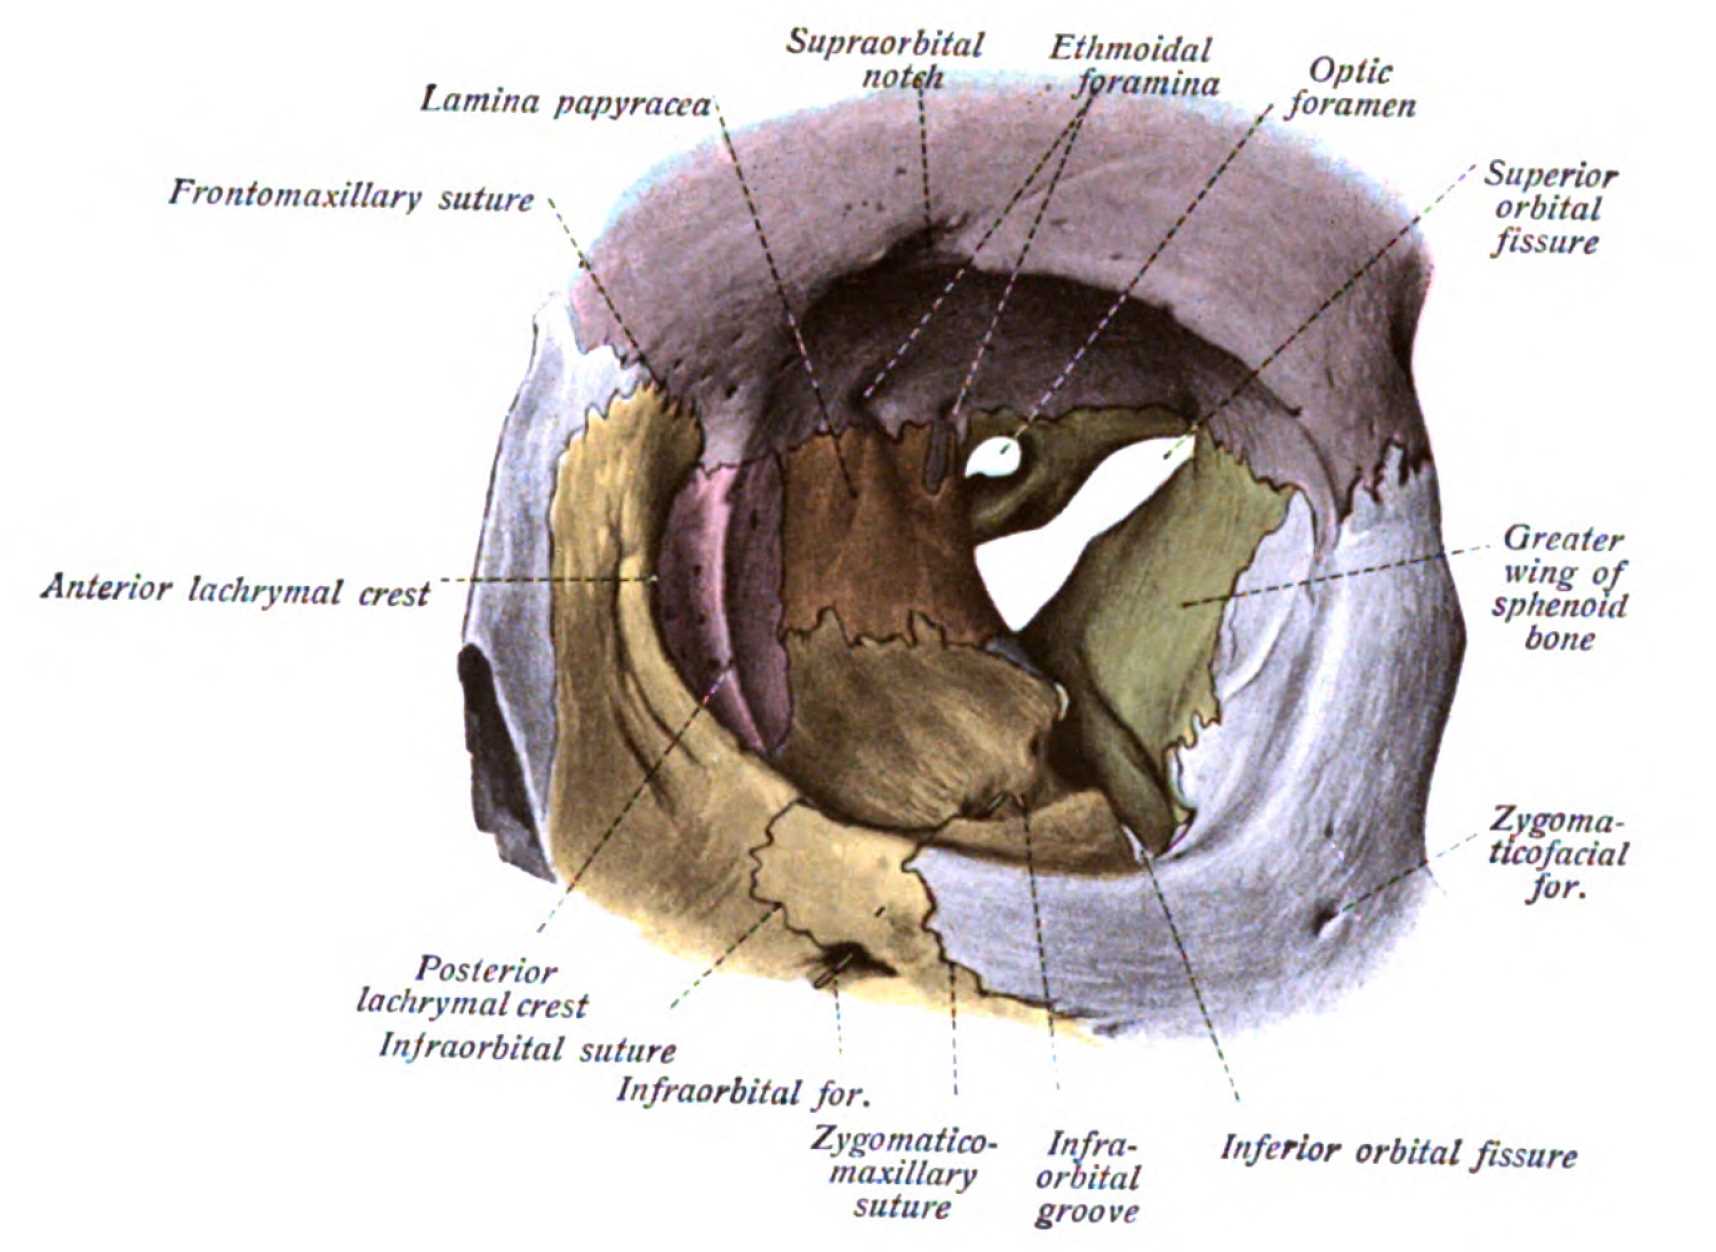 Orbit as seen from the front, with bones labeled in different colors, and superior orbital fissure at center as an "hour-glass" formation. 